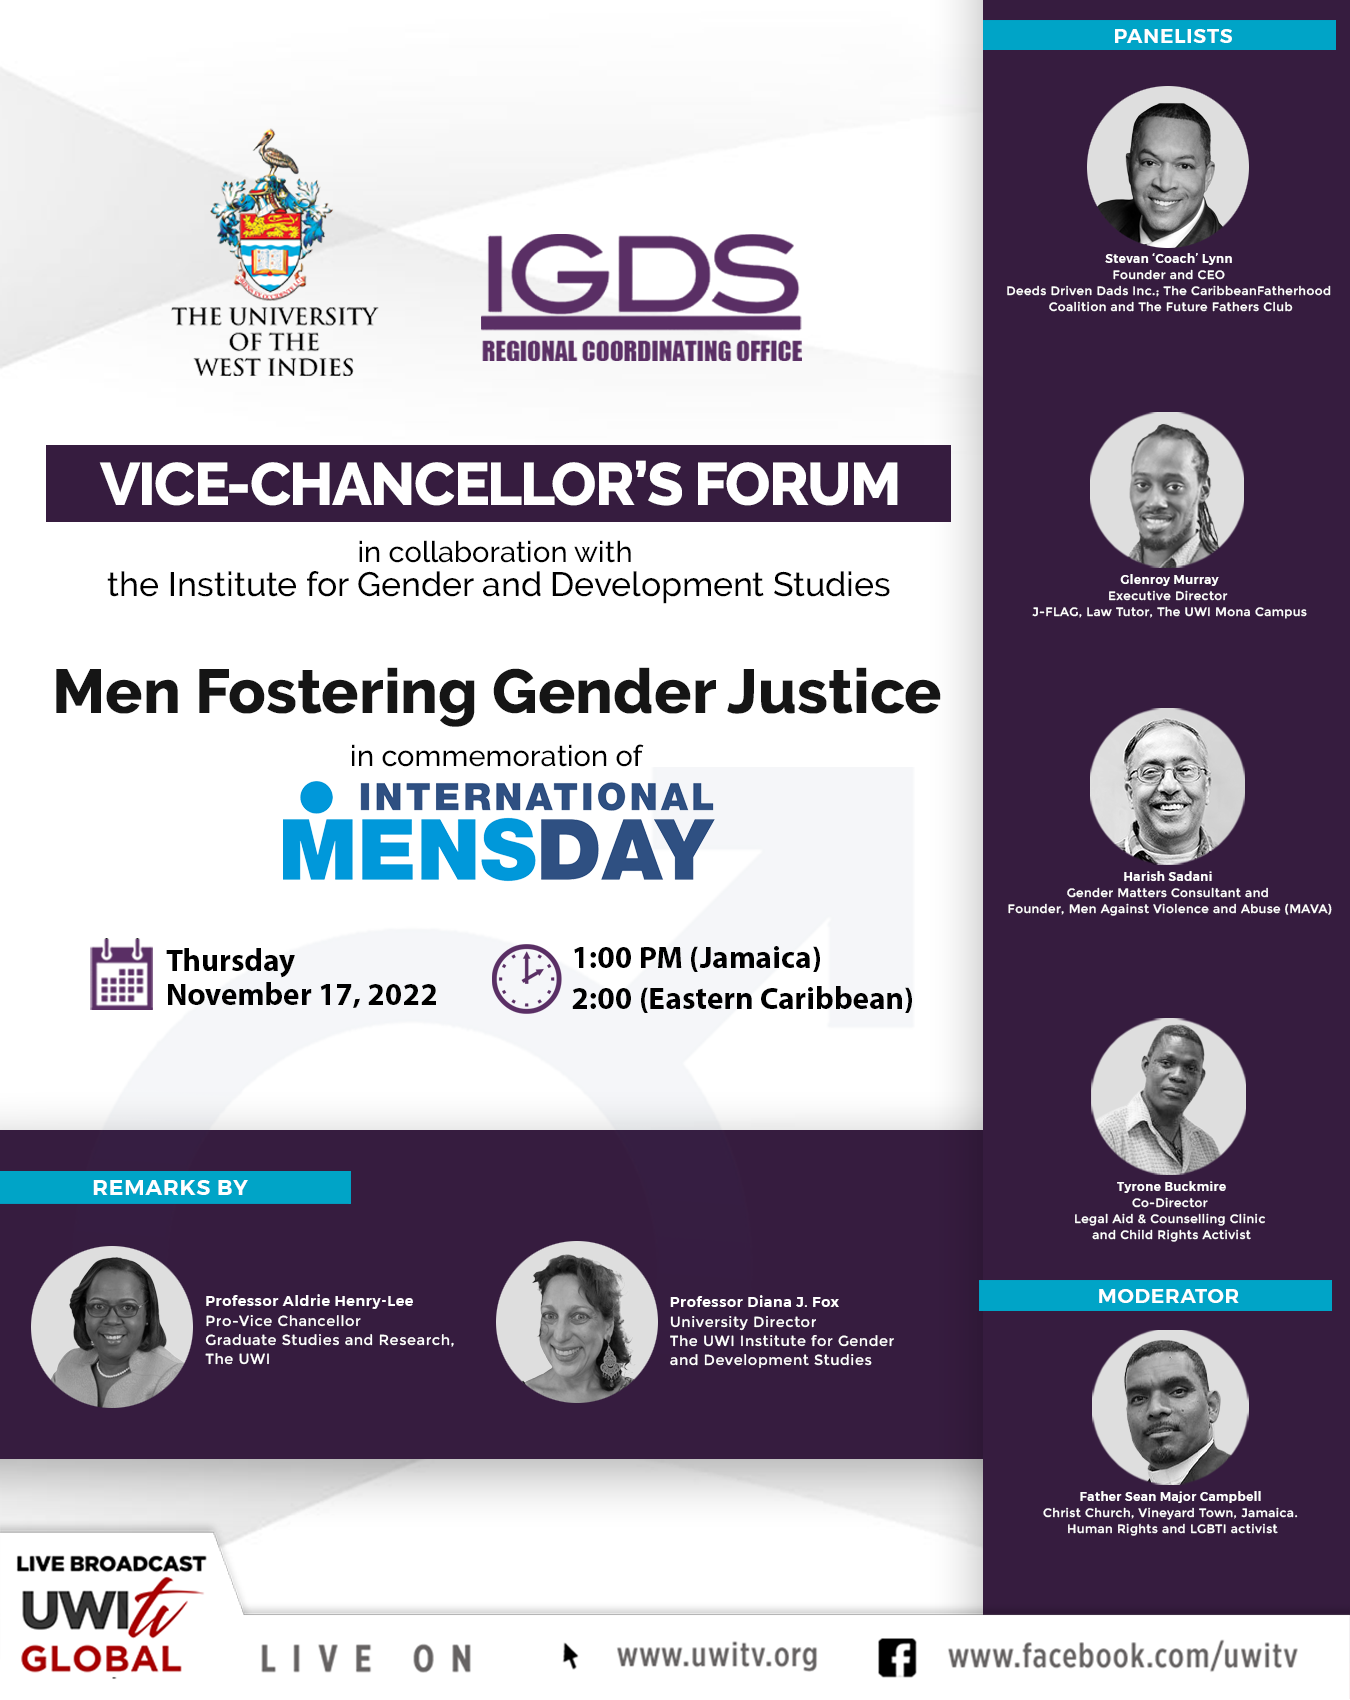 Upcoming Vice-Chancellor's Forum | Men Fostering Gender Justice